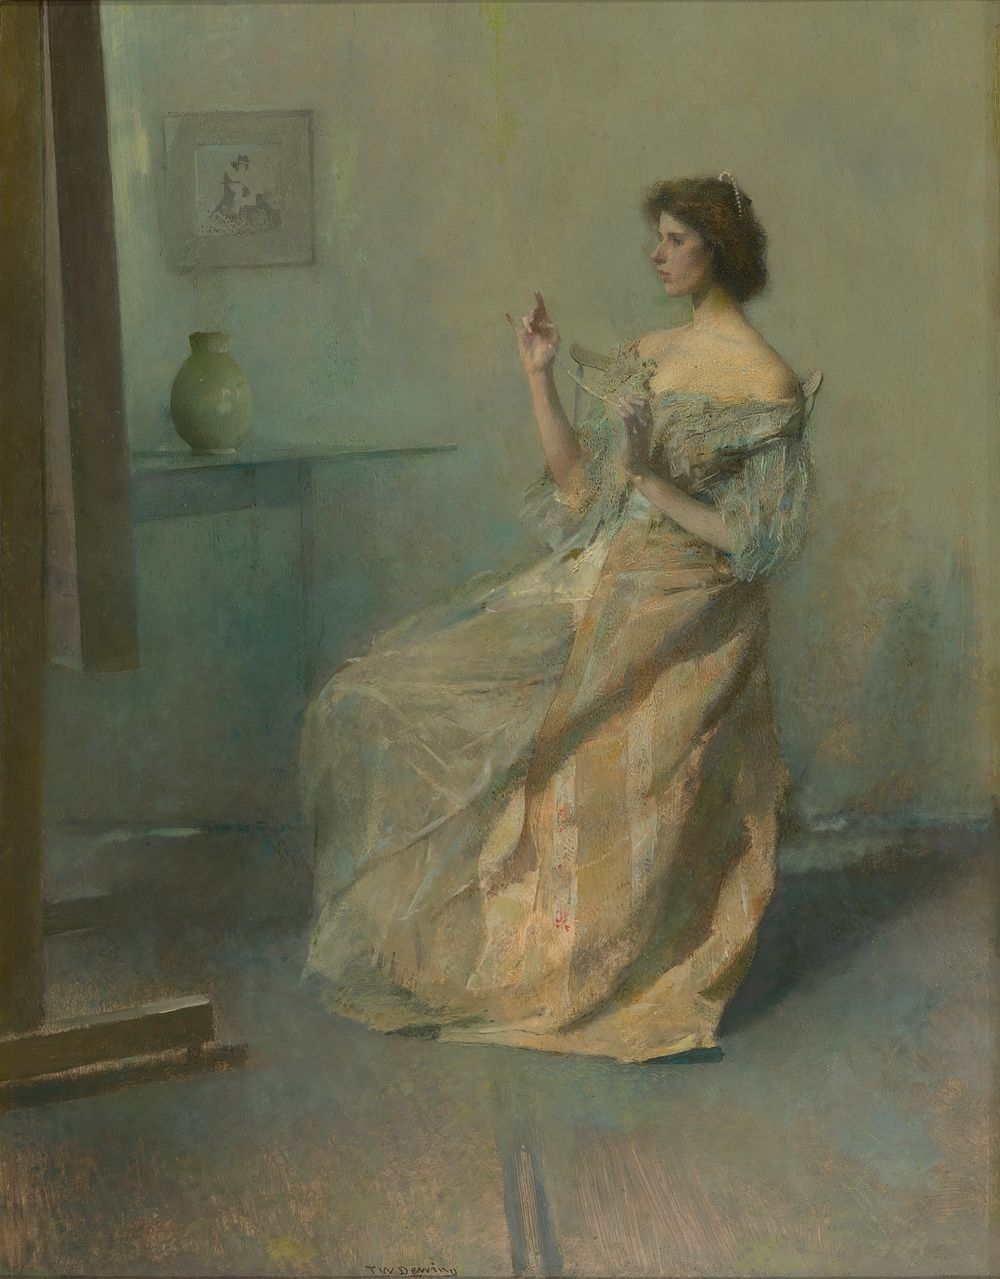 The Necklace by Thomas Wilmer Dewing